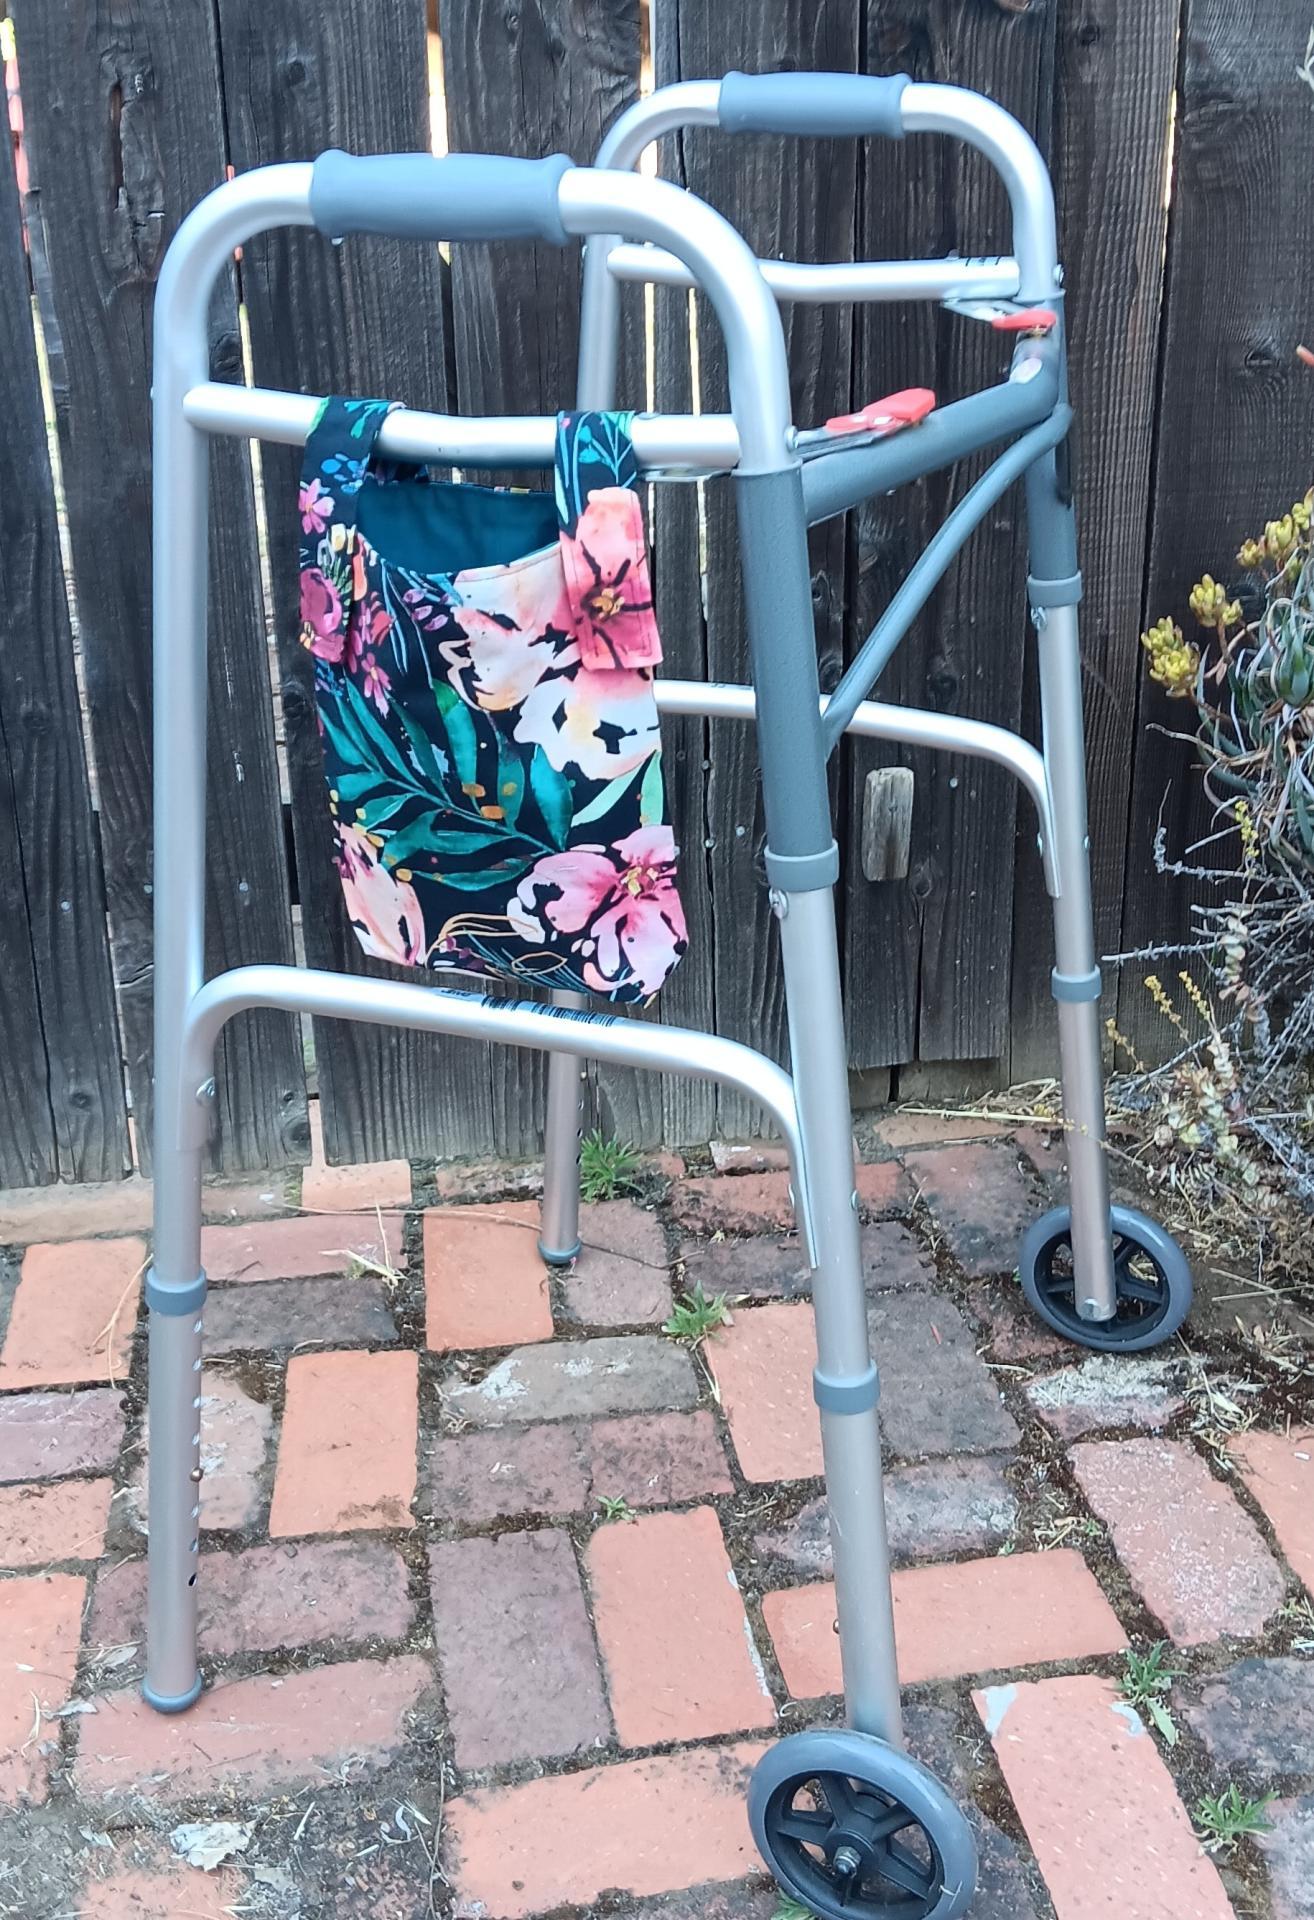 Simple small basic bag for crutch. Can be used on walker, stroller, scooter handlebars. Parrots cockatiels bird theme ,hanging bag caddy